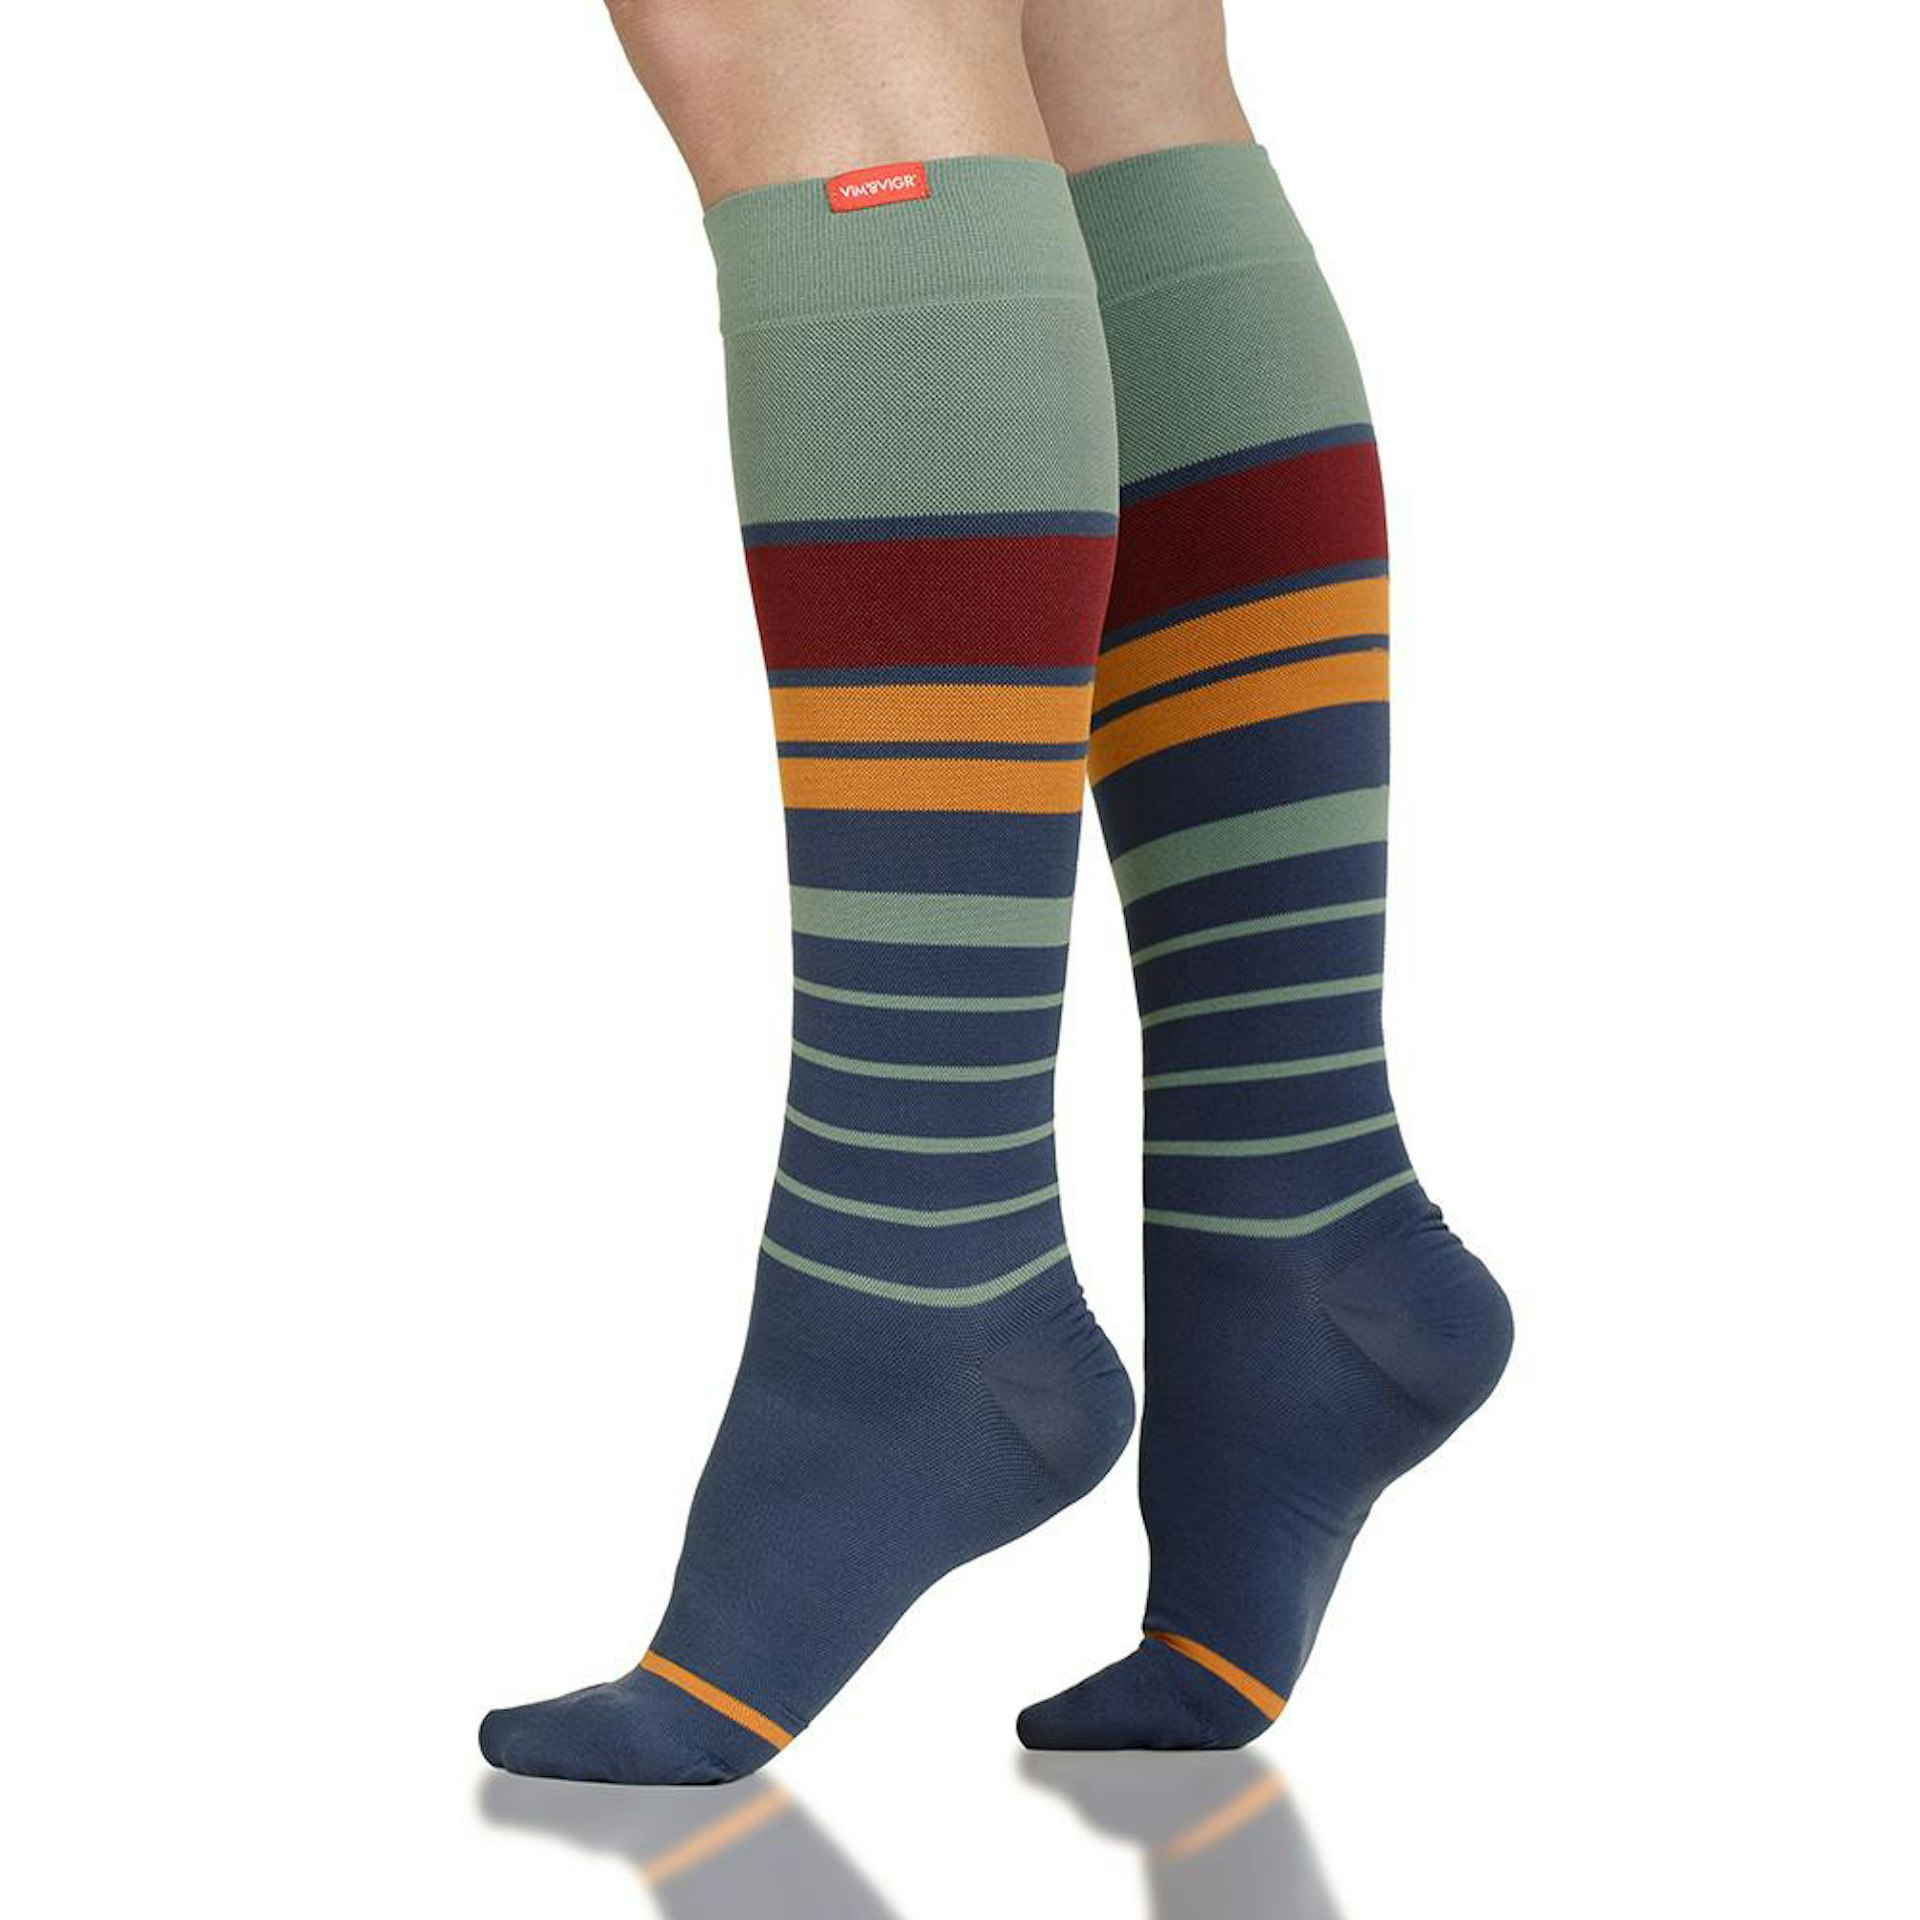 A person's legs seen from the knees down, wearing green, yellow and red–striped compression socks